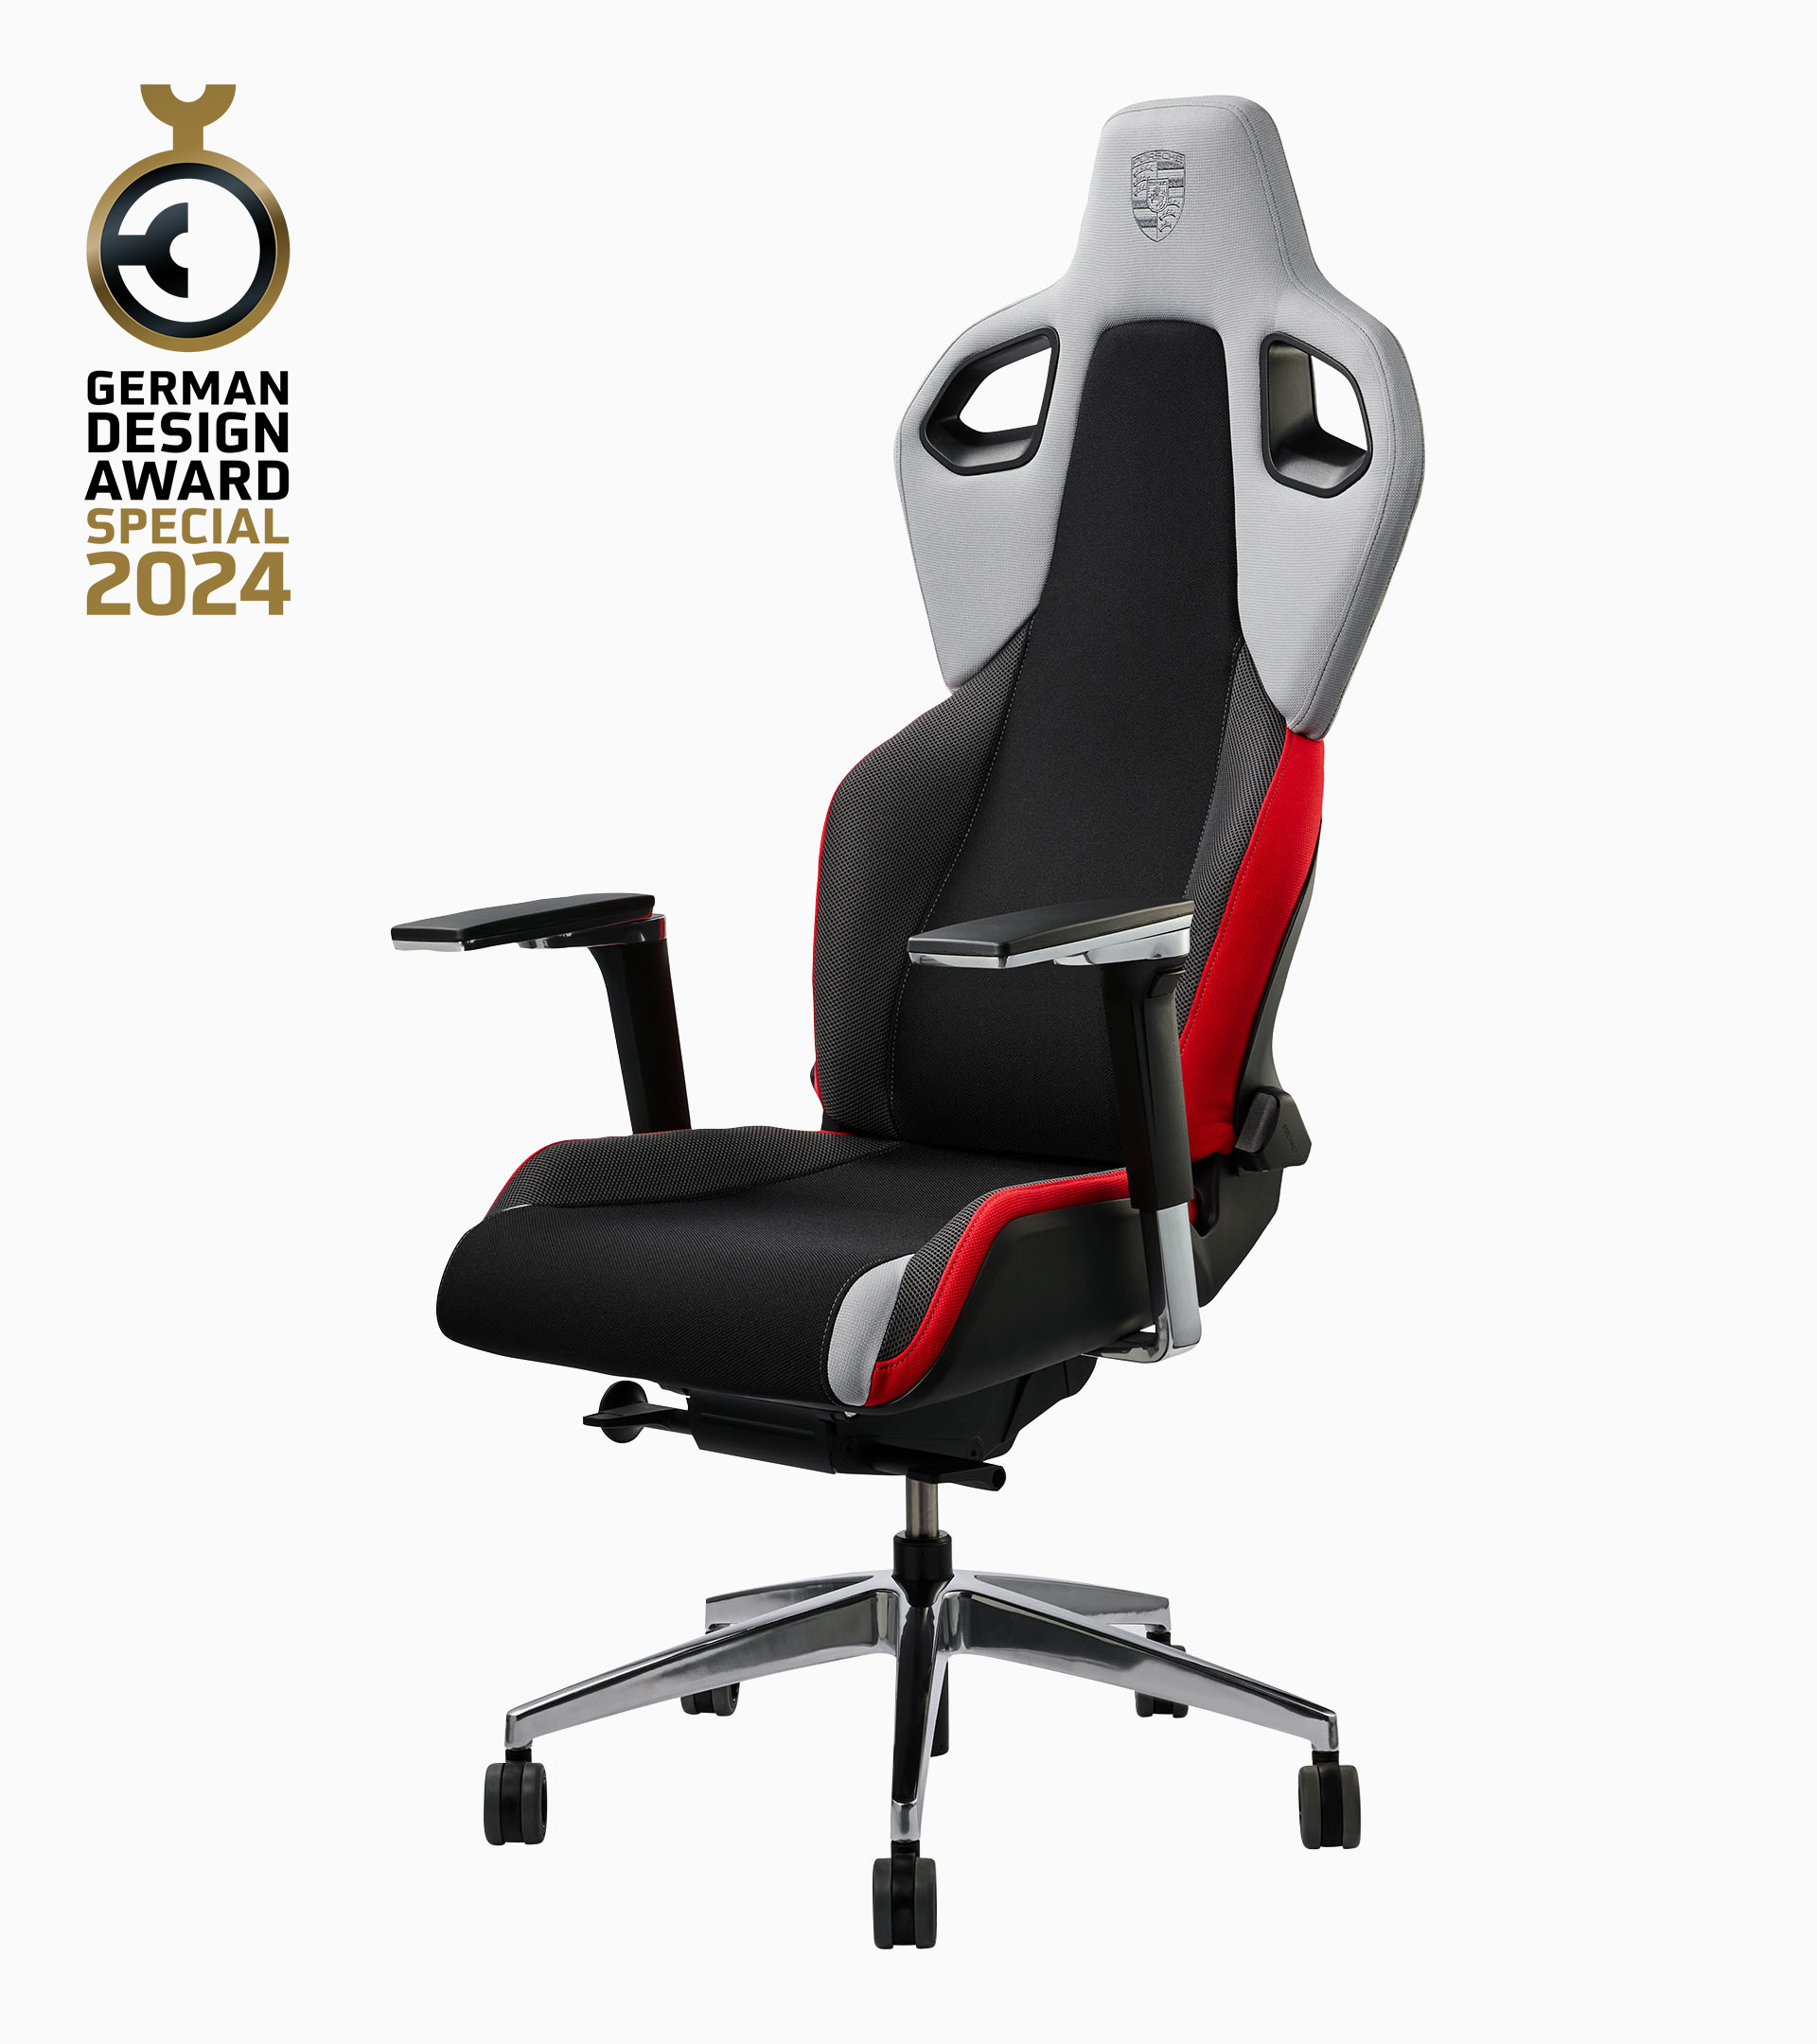 The RECARO x Porsche Gaming Chair is a limited edition gaming chair developed in cooperation between Recaro and Porsche.